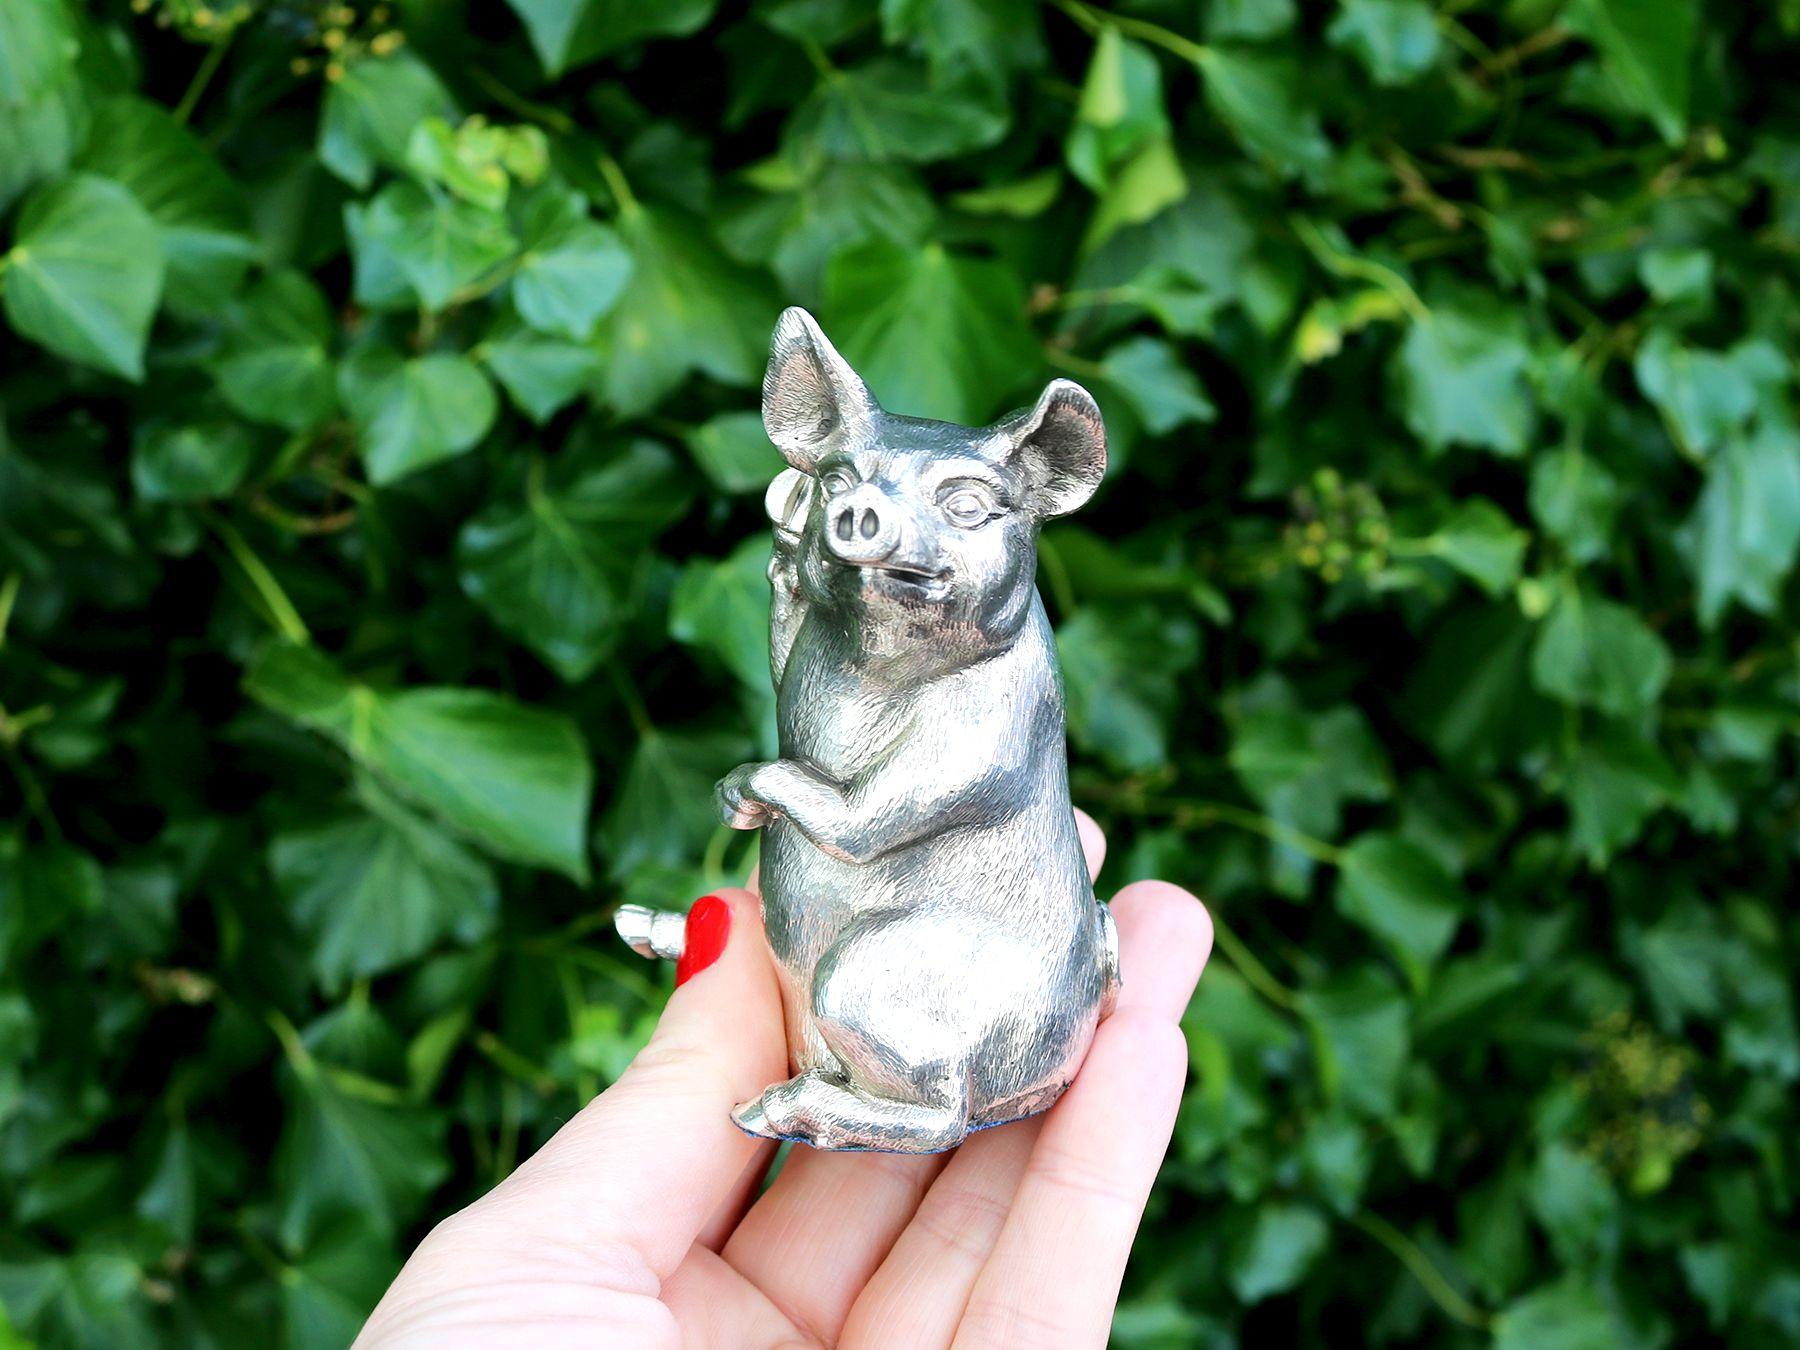 An exceptional, fine and impressive vintage cast English sterling silver paperweight/model of a pig; part of our animal related silverware collection.

This exceptional, fine and impressive vintage sterling silver pig ornament/paper weight has